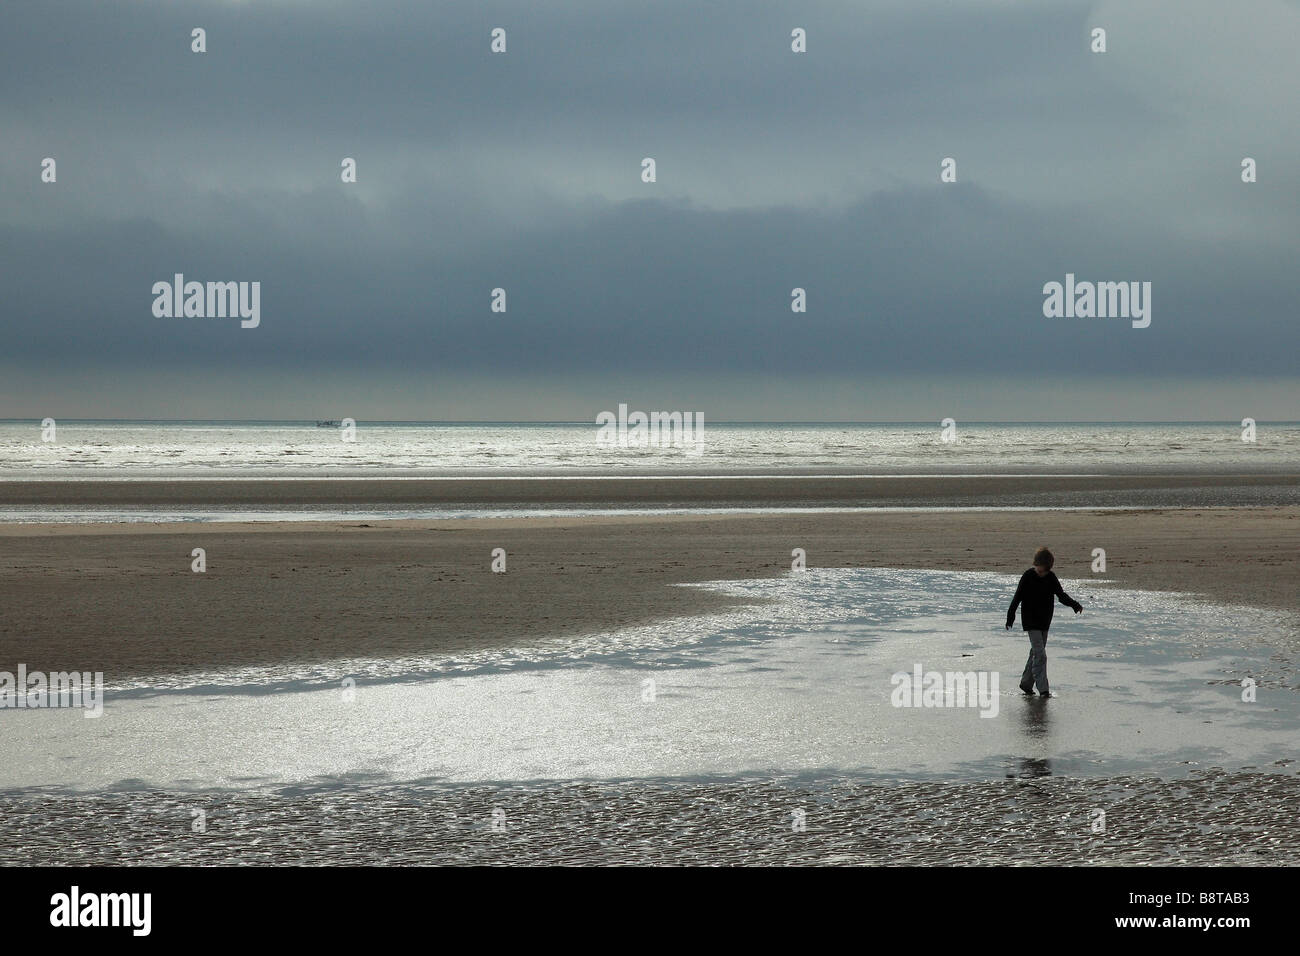 Boy walking on the beach on a stormy day Stock Photo